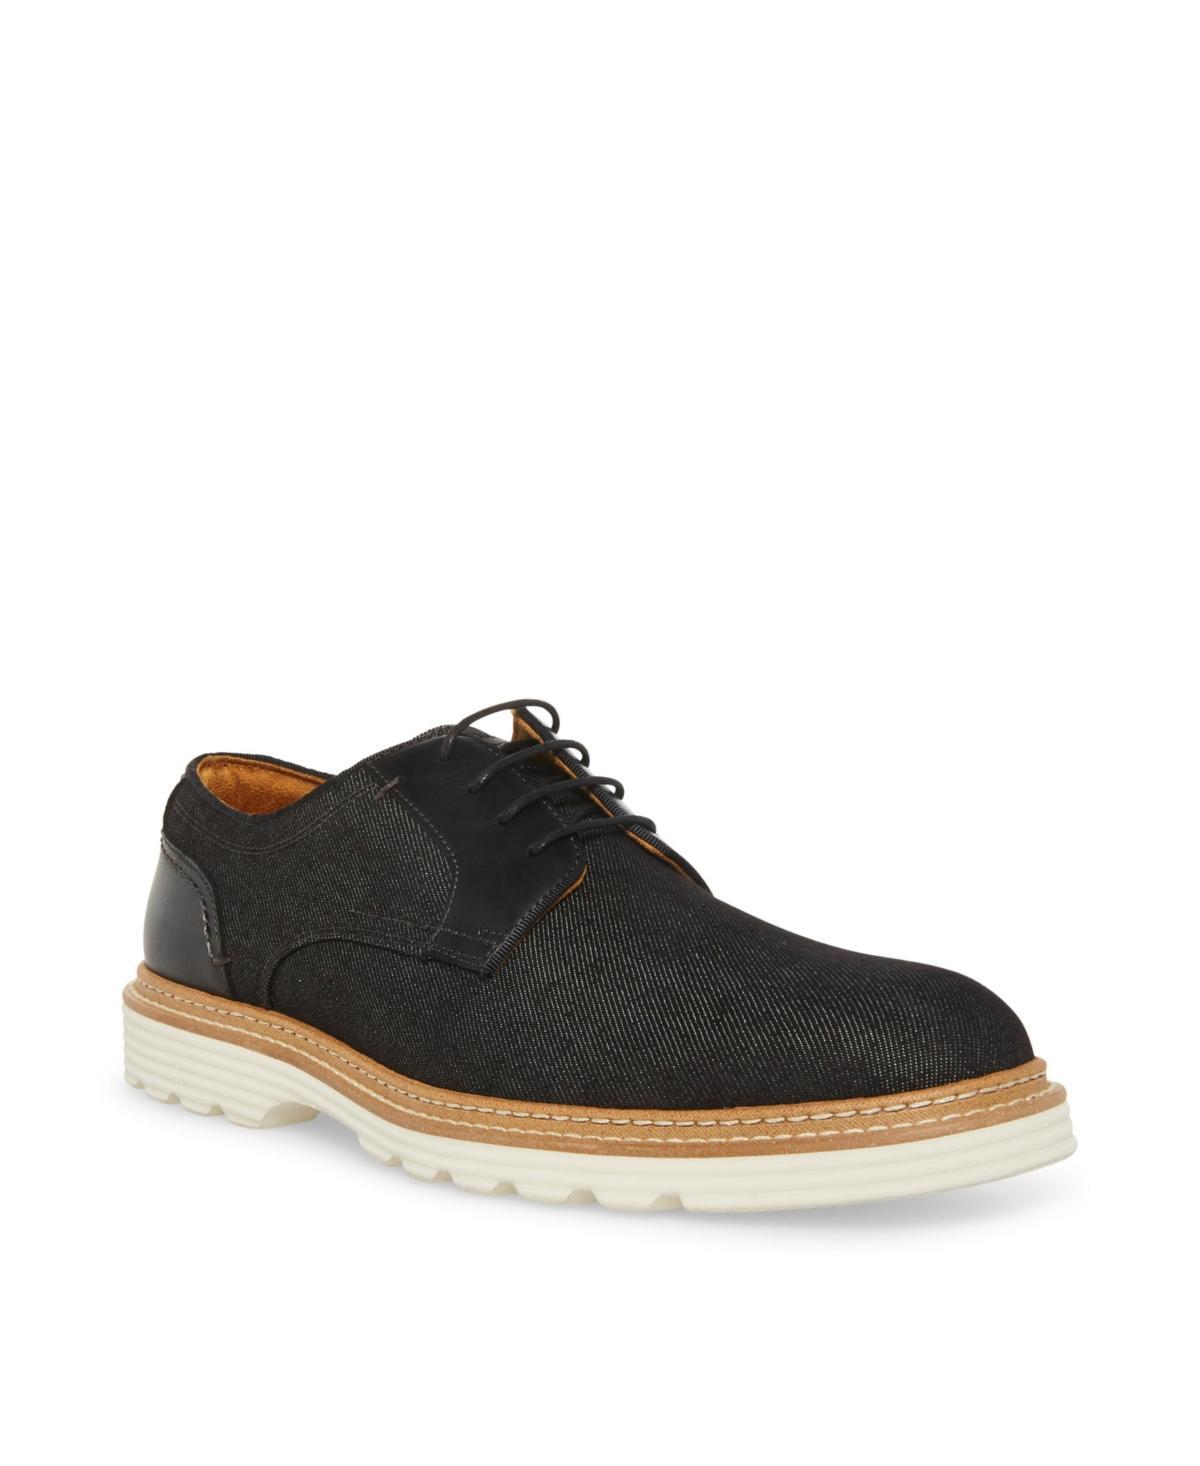 Steve Madden Curie Fabric) Men's Shoes Product Image